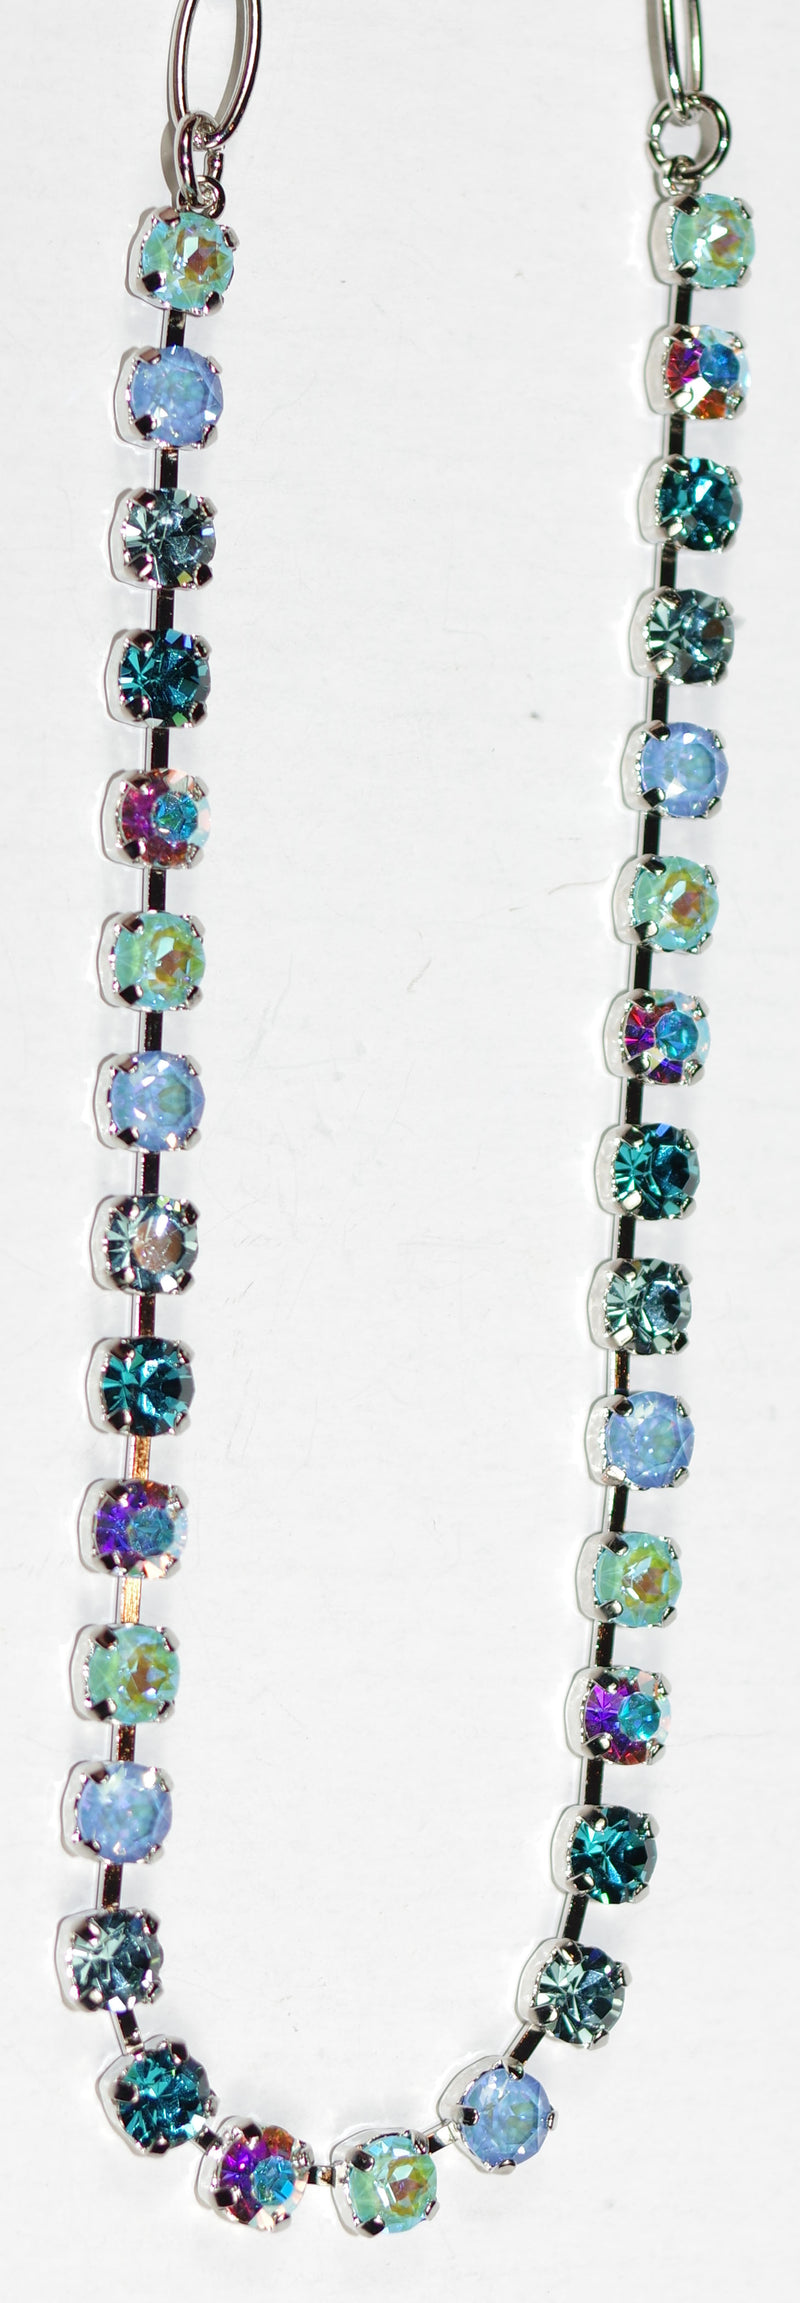 MARIANA NECKLACE TRANQUIL: blue, a/b, sun kissed stones in silver rhodium setting, 18" adjustable chain